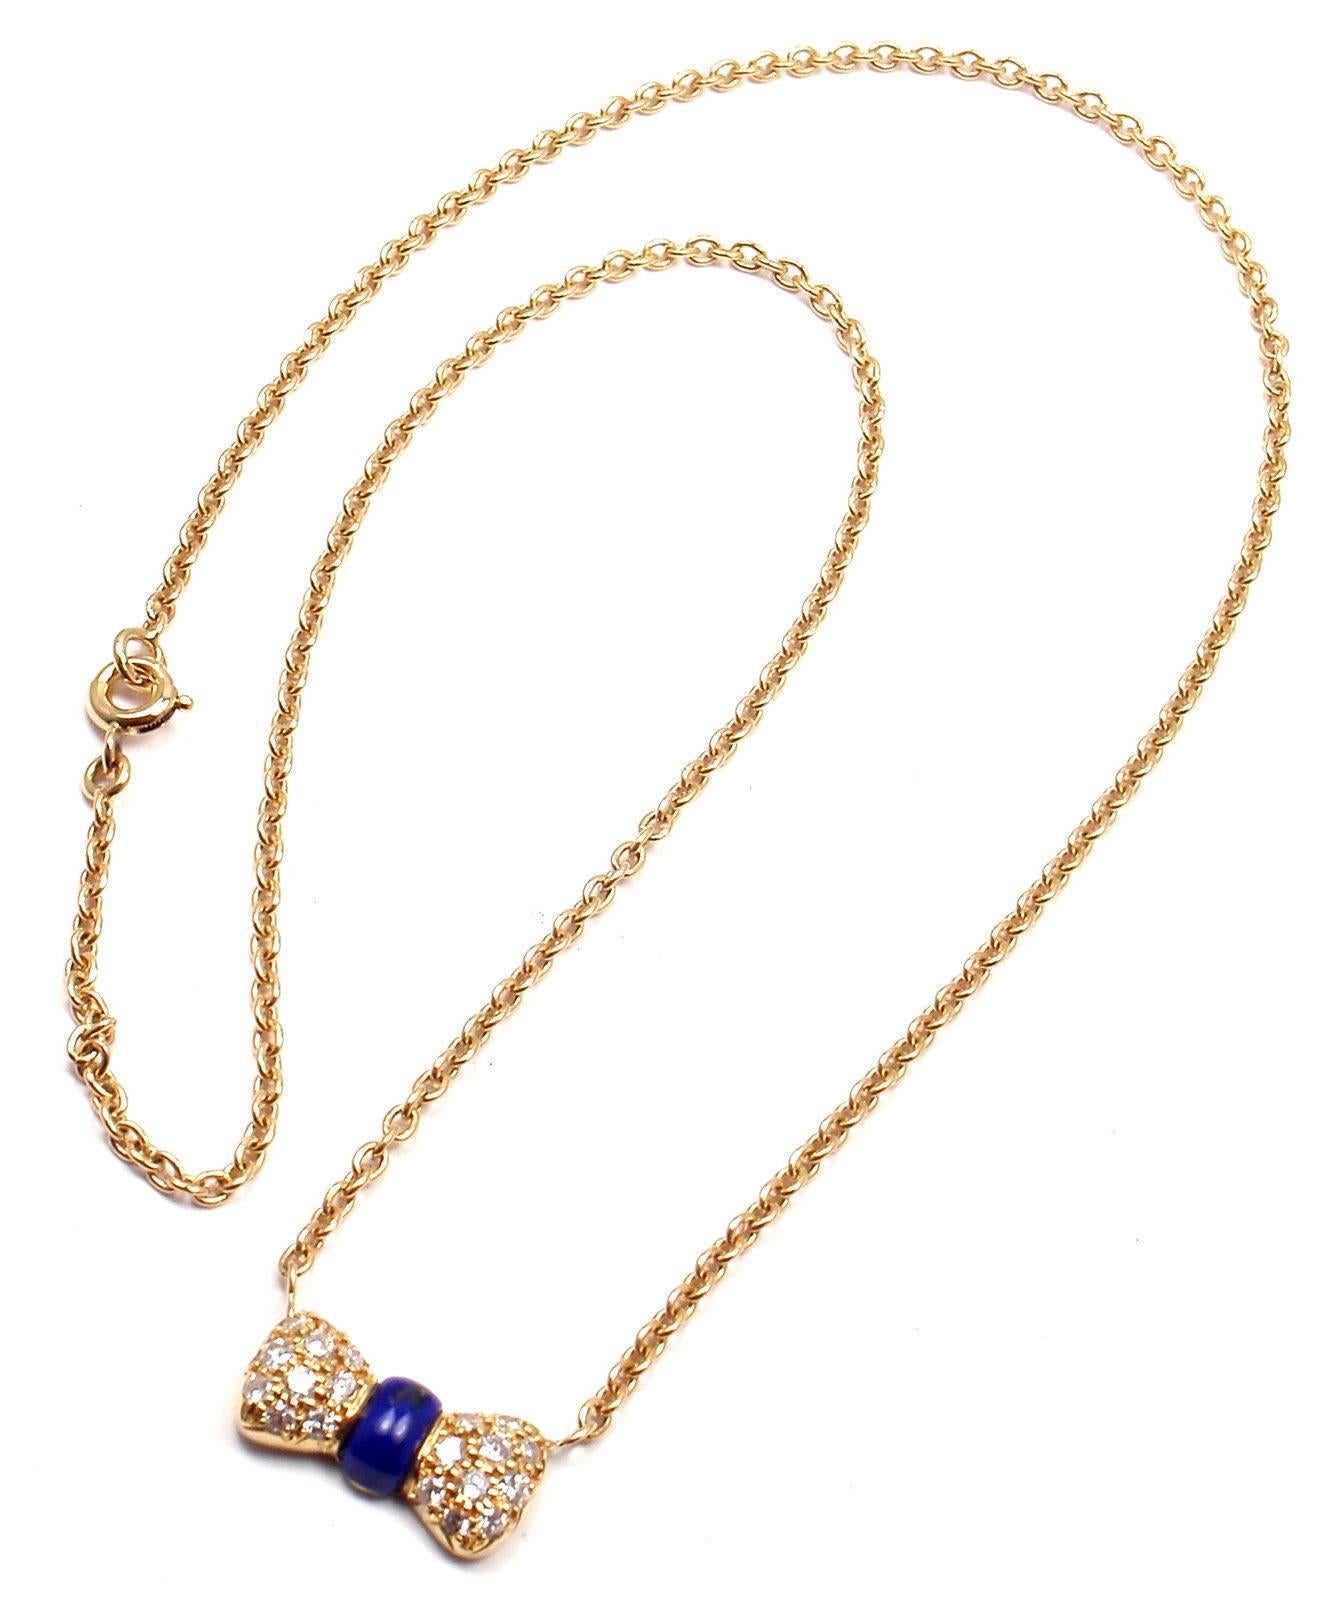 18k Yellow Gold Diamond Lapis Lazuli Bow Necklace by Van Cleef & Arpels. With 20 diamond VVS1 clarity, G color total weight .10ct  

Details: 
Necklace Length: 15.5''
Pendant: 15mm x 8mm
Weight: 5.5 grams
Stamped Hallmarks: VCA 18k 83 BOCT39